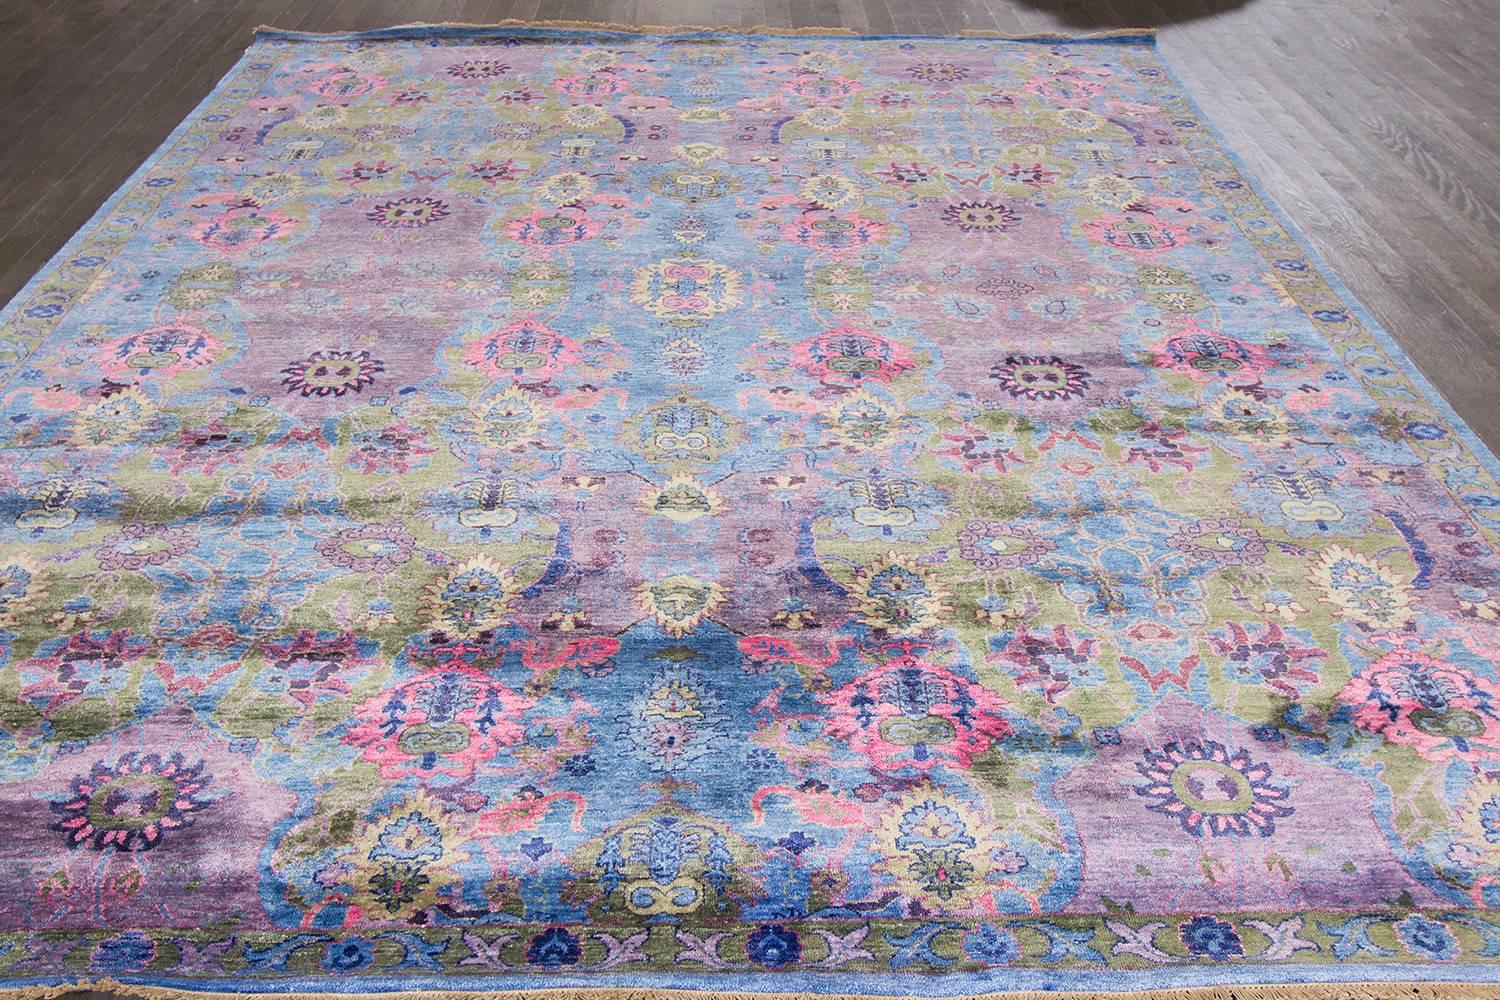 Modern (2016) Indian rug with a blue field and multicolored pattern throughout. Measures approximateky 9 feet by 12 feet.